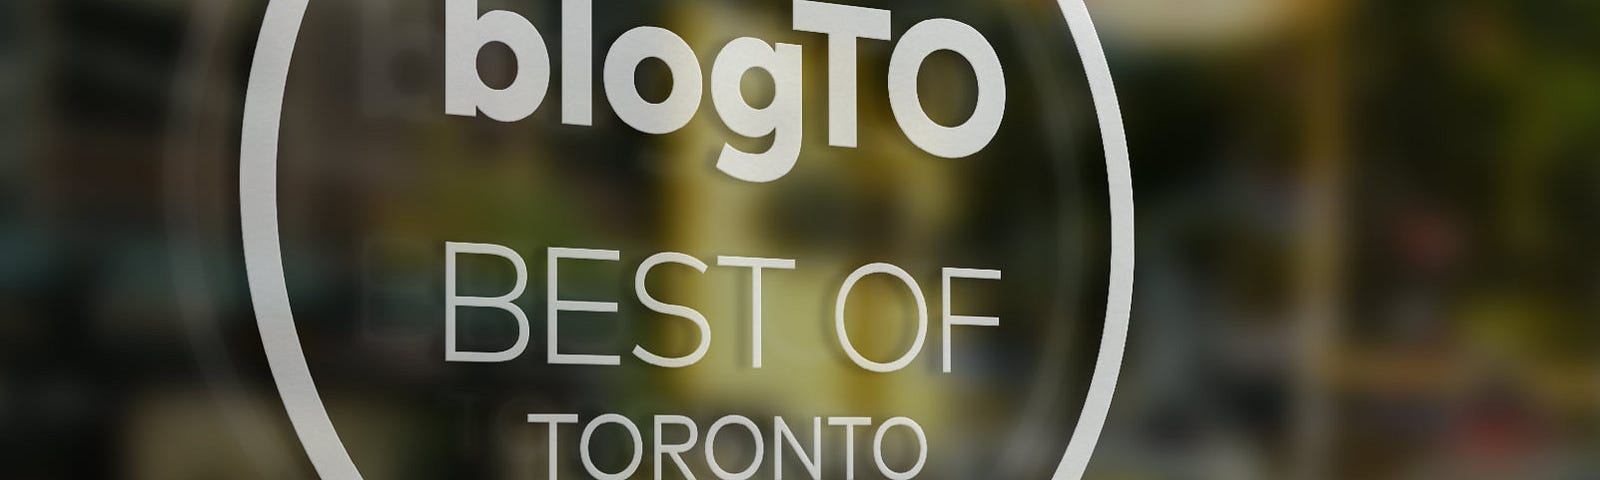 Logo design and brand typography for BlogTO shown in an example context